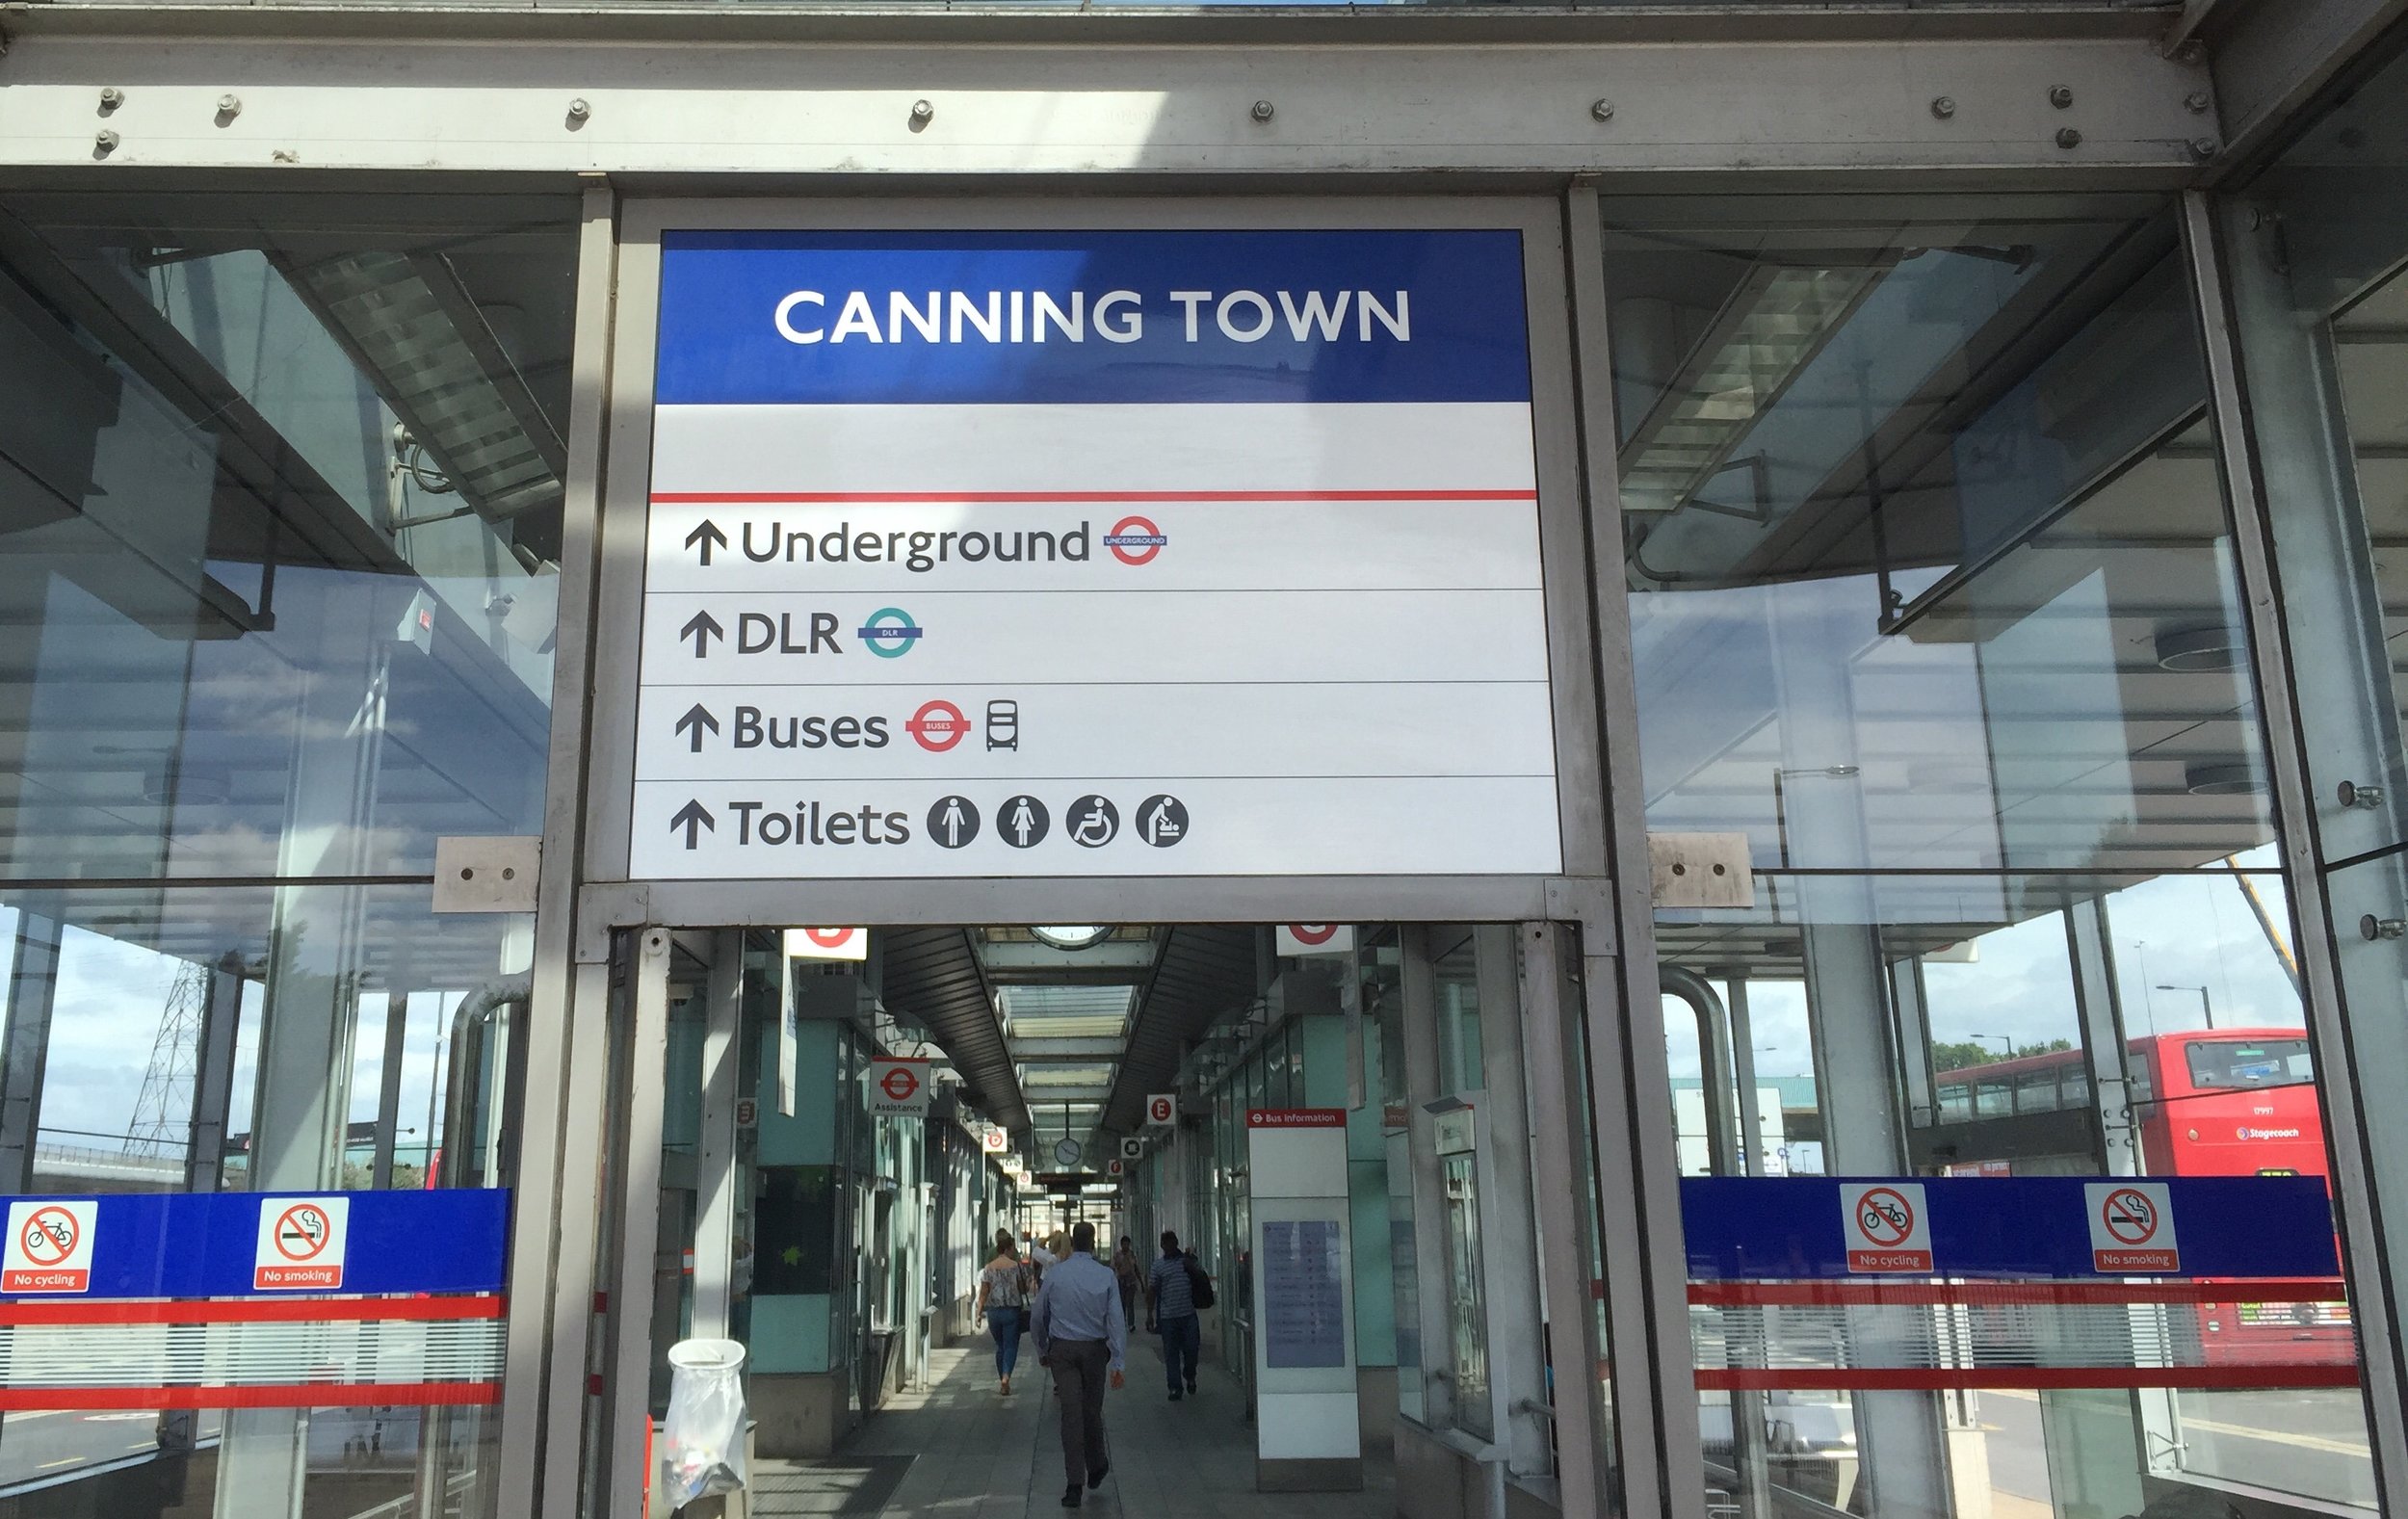 CANNING TOWN